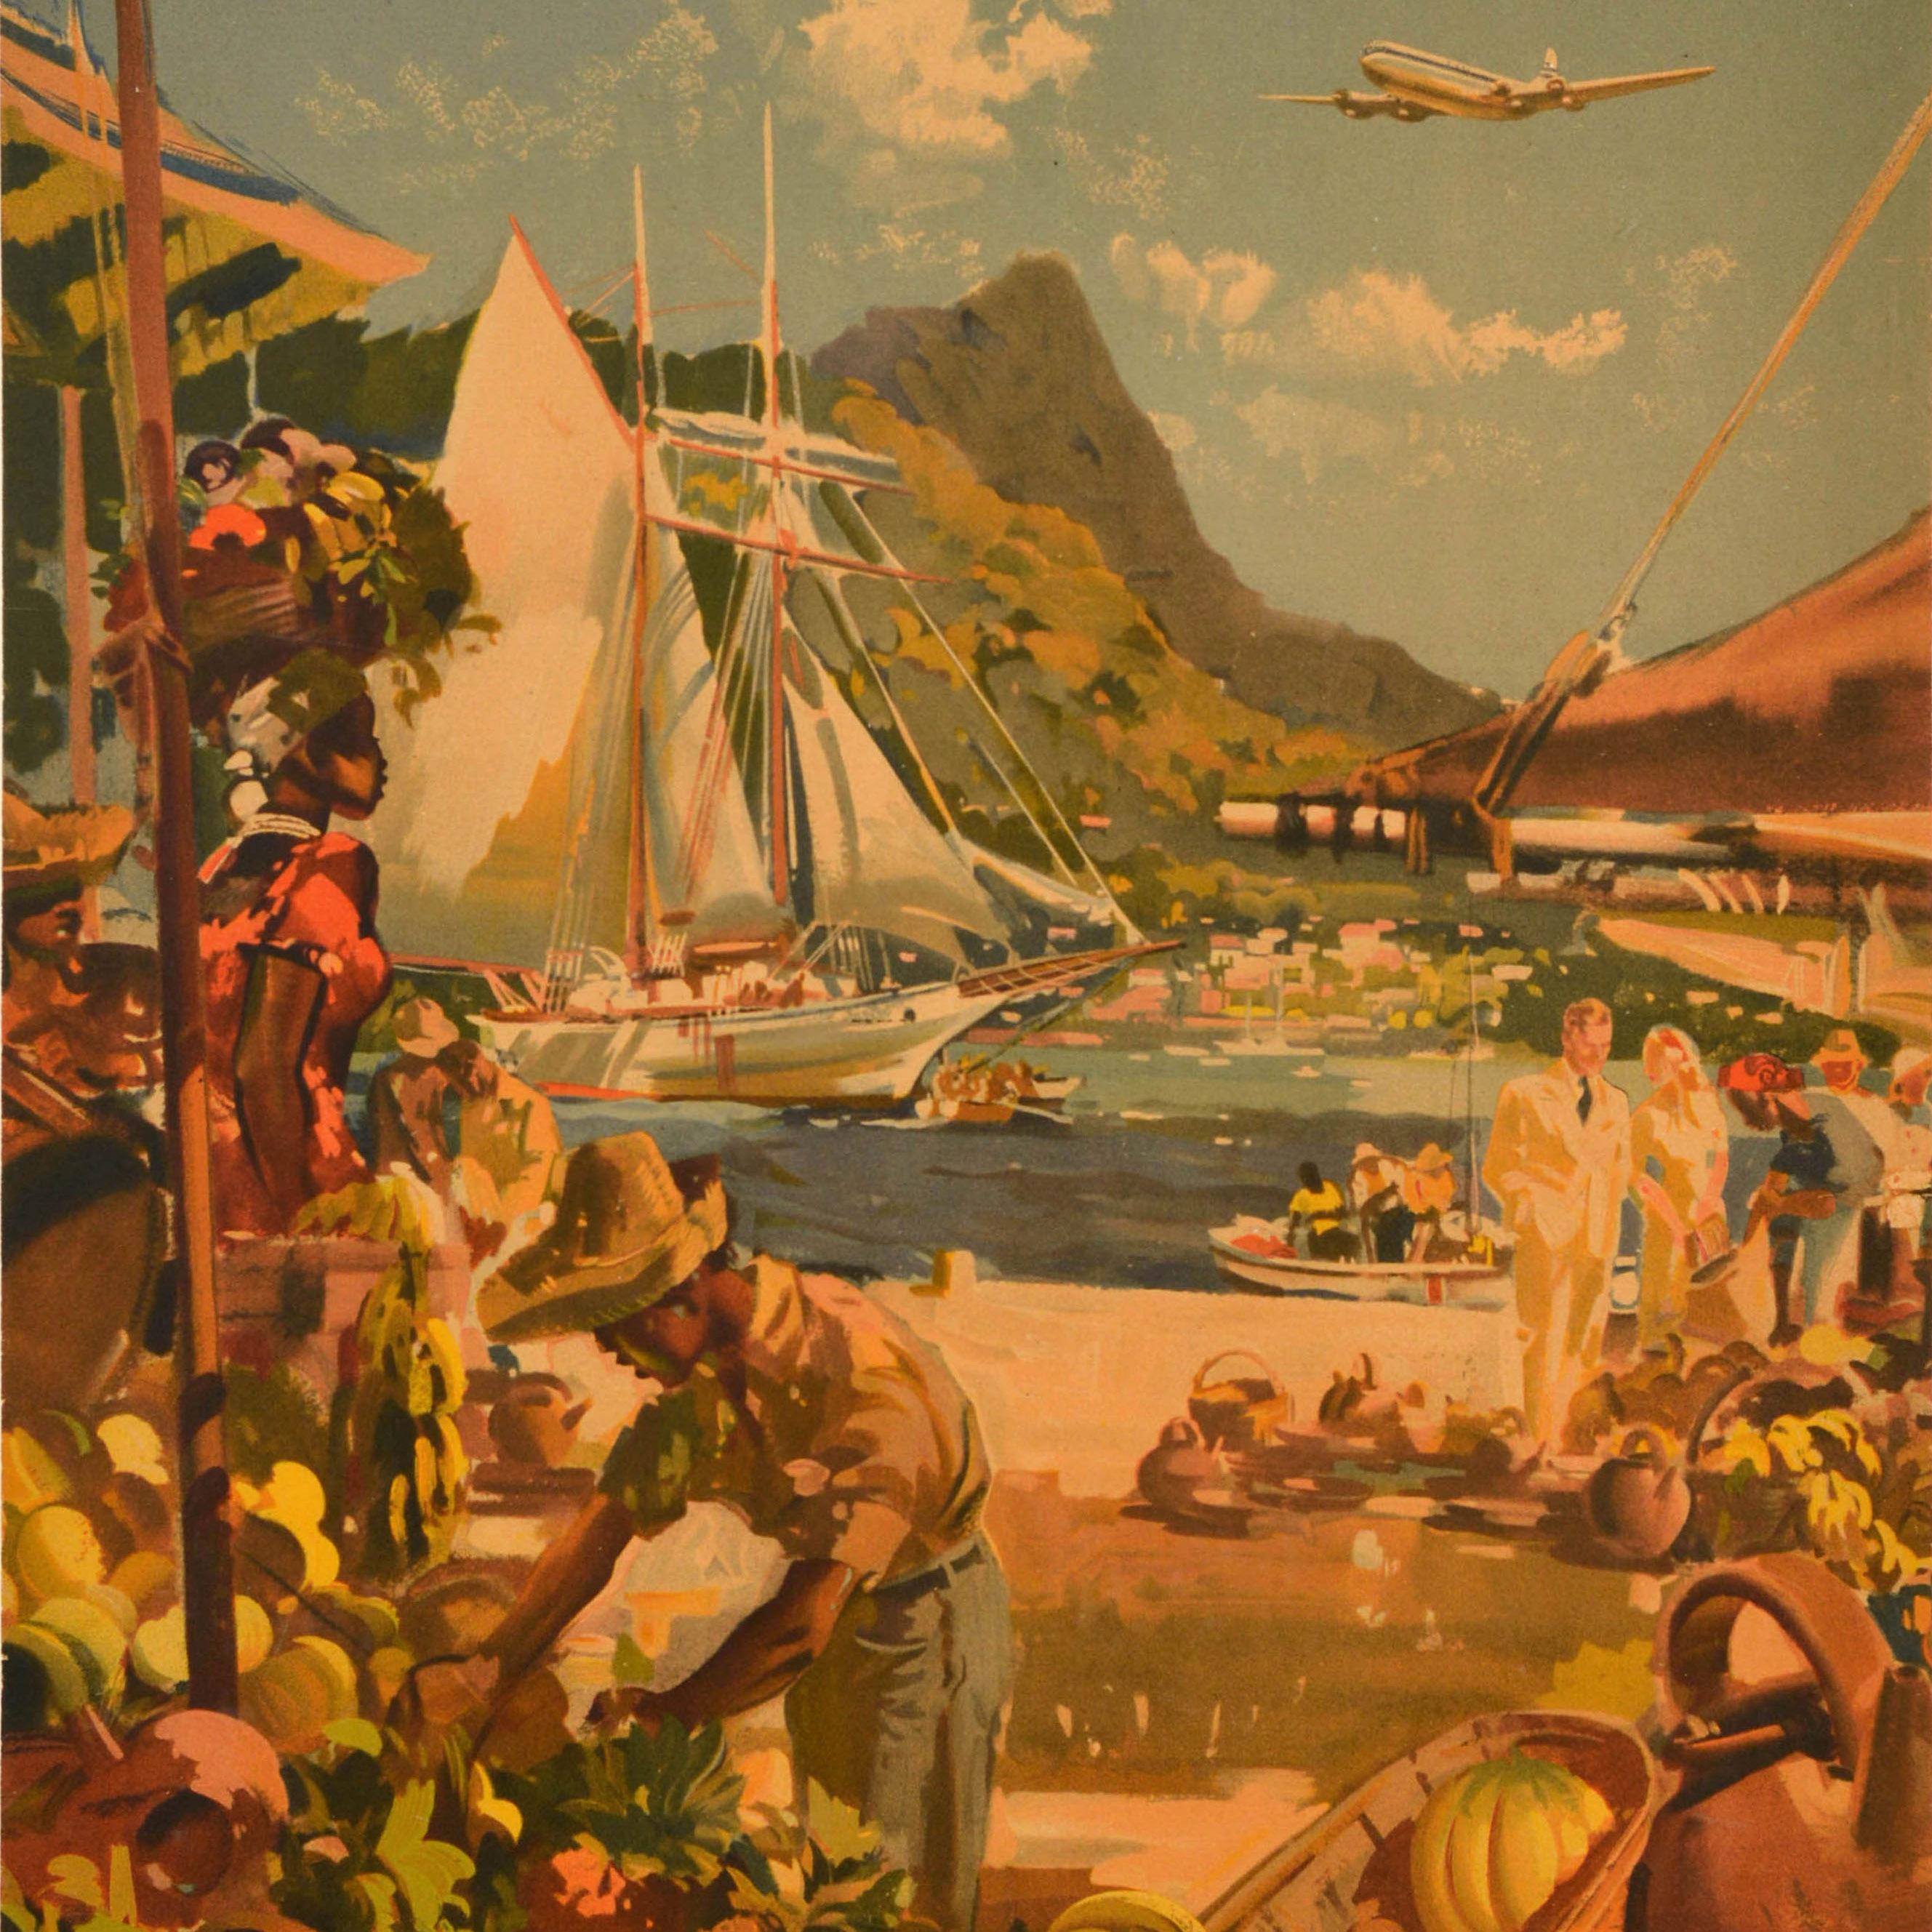 Original Vintage Travel Advertising Poster Fly To The Caribbean By BOAC Wootton In Good Condition For Sale In London, GB